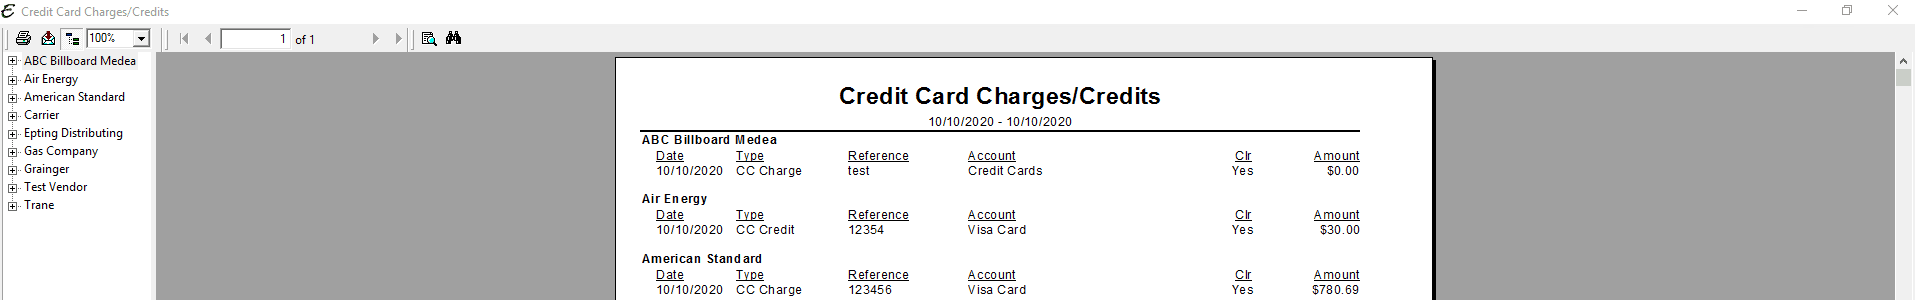 Credit Card Charges Credits Report PDF